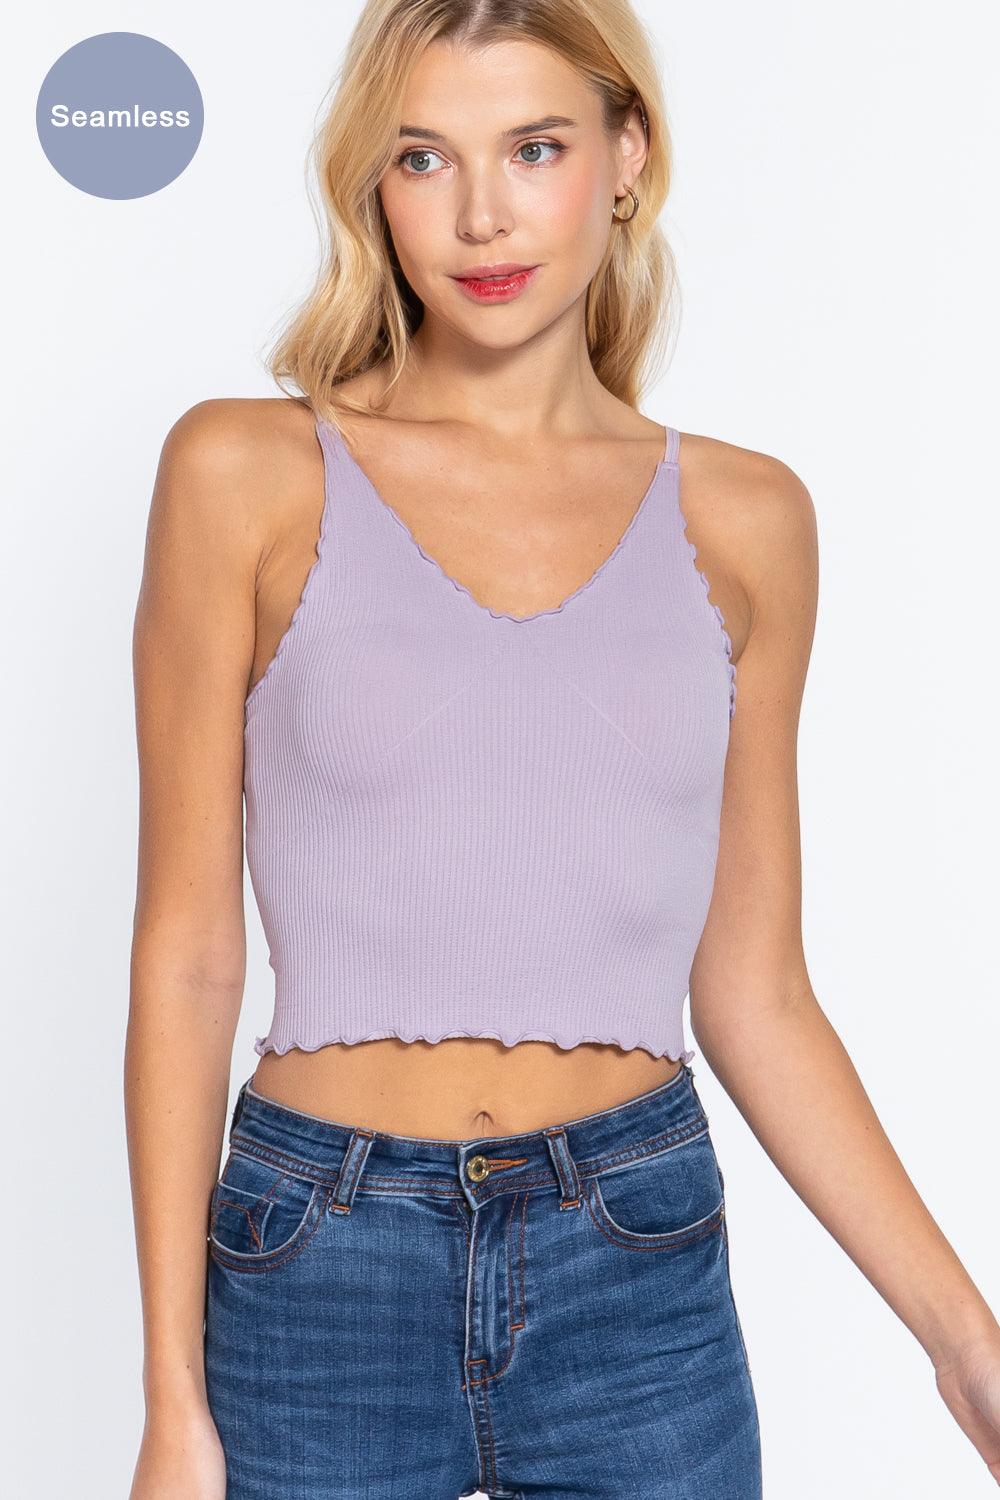 Lettuce Edge Seamless Cami Top - Kreative Passions